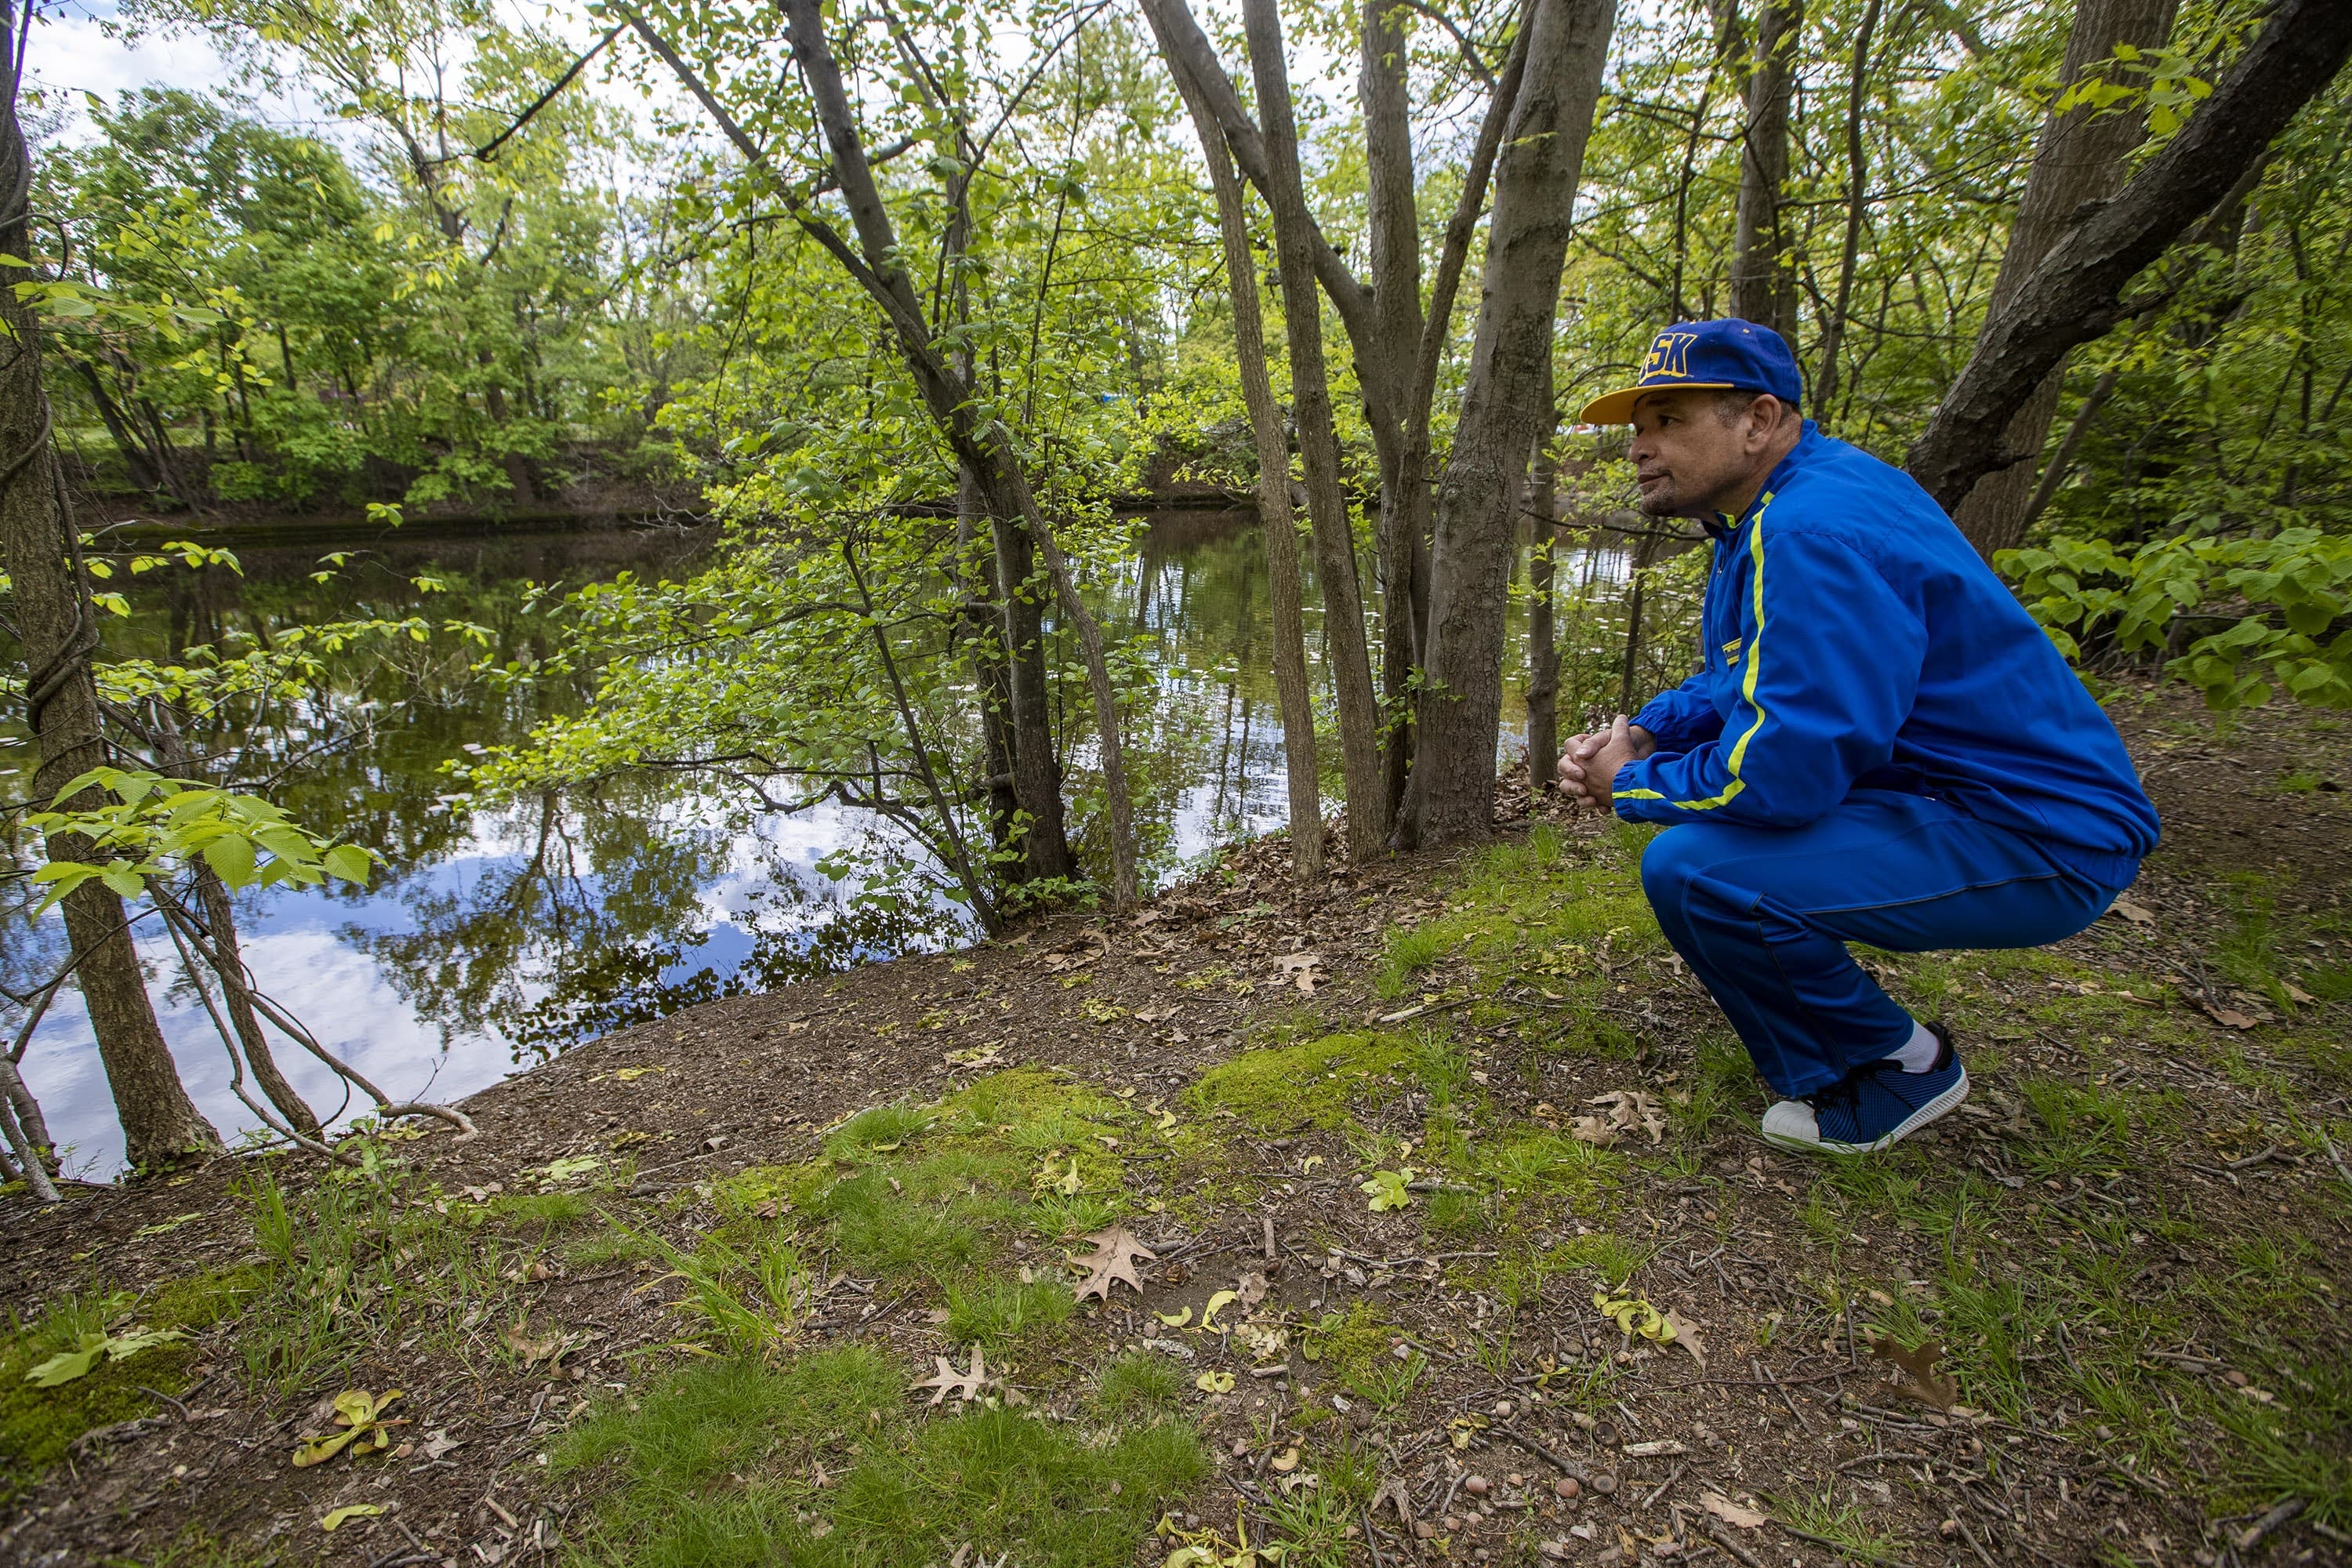 Poet Terry Carter kneels down to gaze at the Mystic River, along the banks in West Medford where he grew up. (Jesse Costa/WBUR)